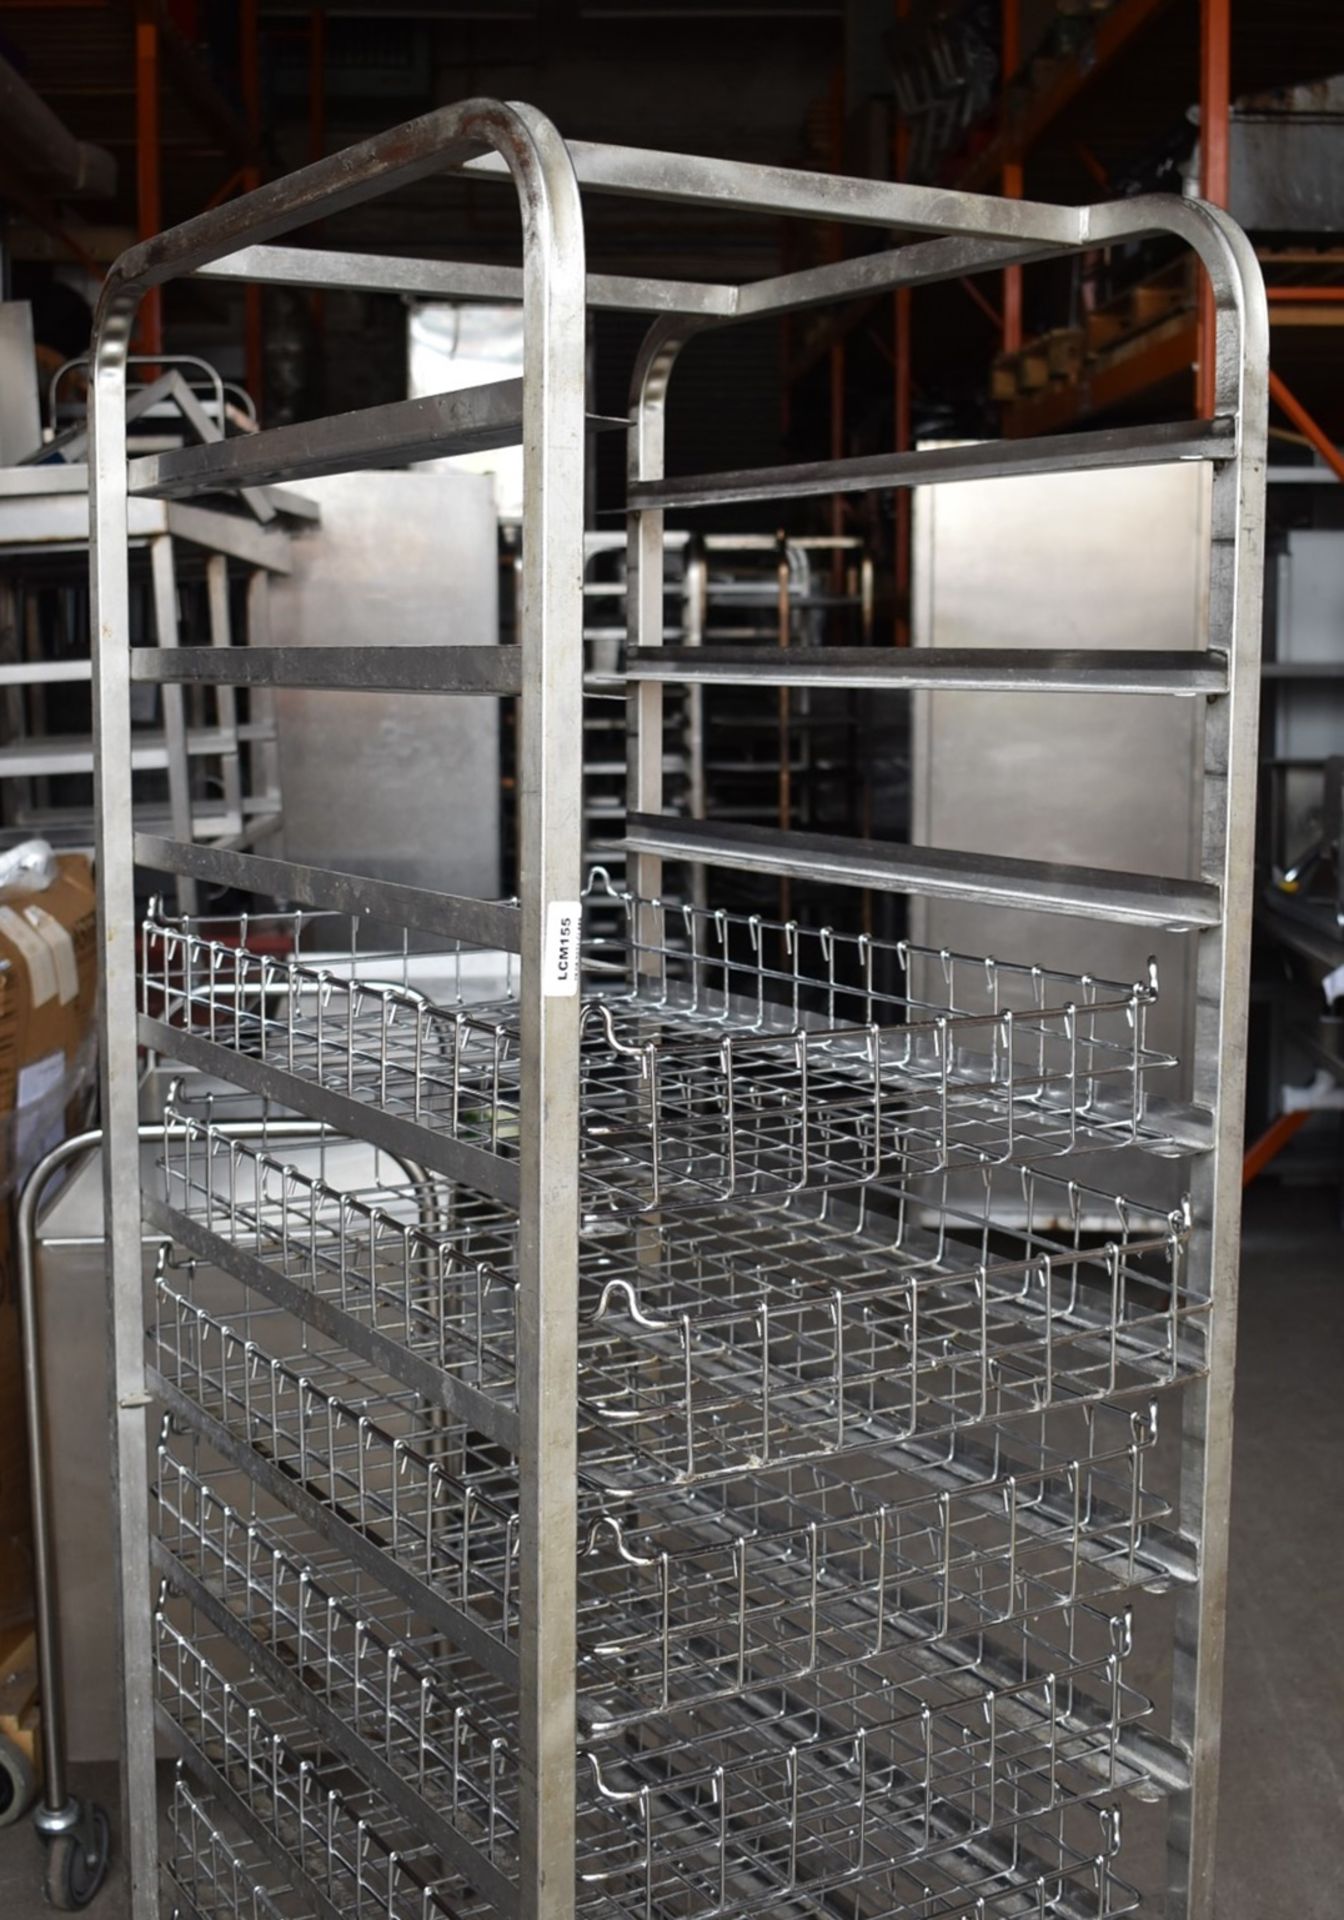 1 x Bakers 11 Tier Mobile Tray Rack With 8 Removable Wire Baskets - Stainless Steel With Castors - - Image 4 of 6